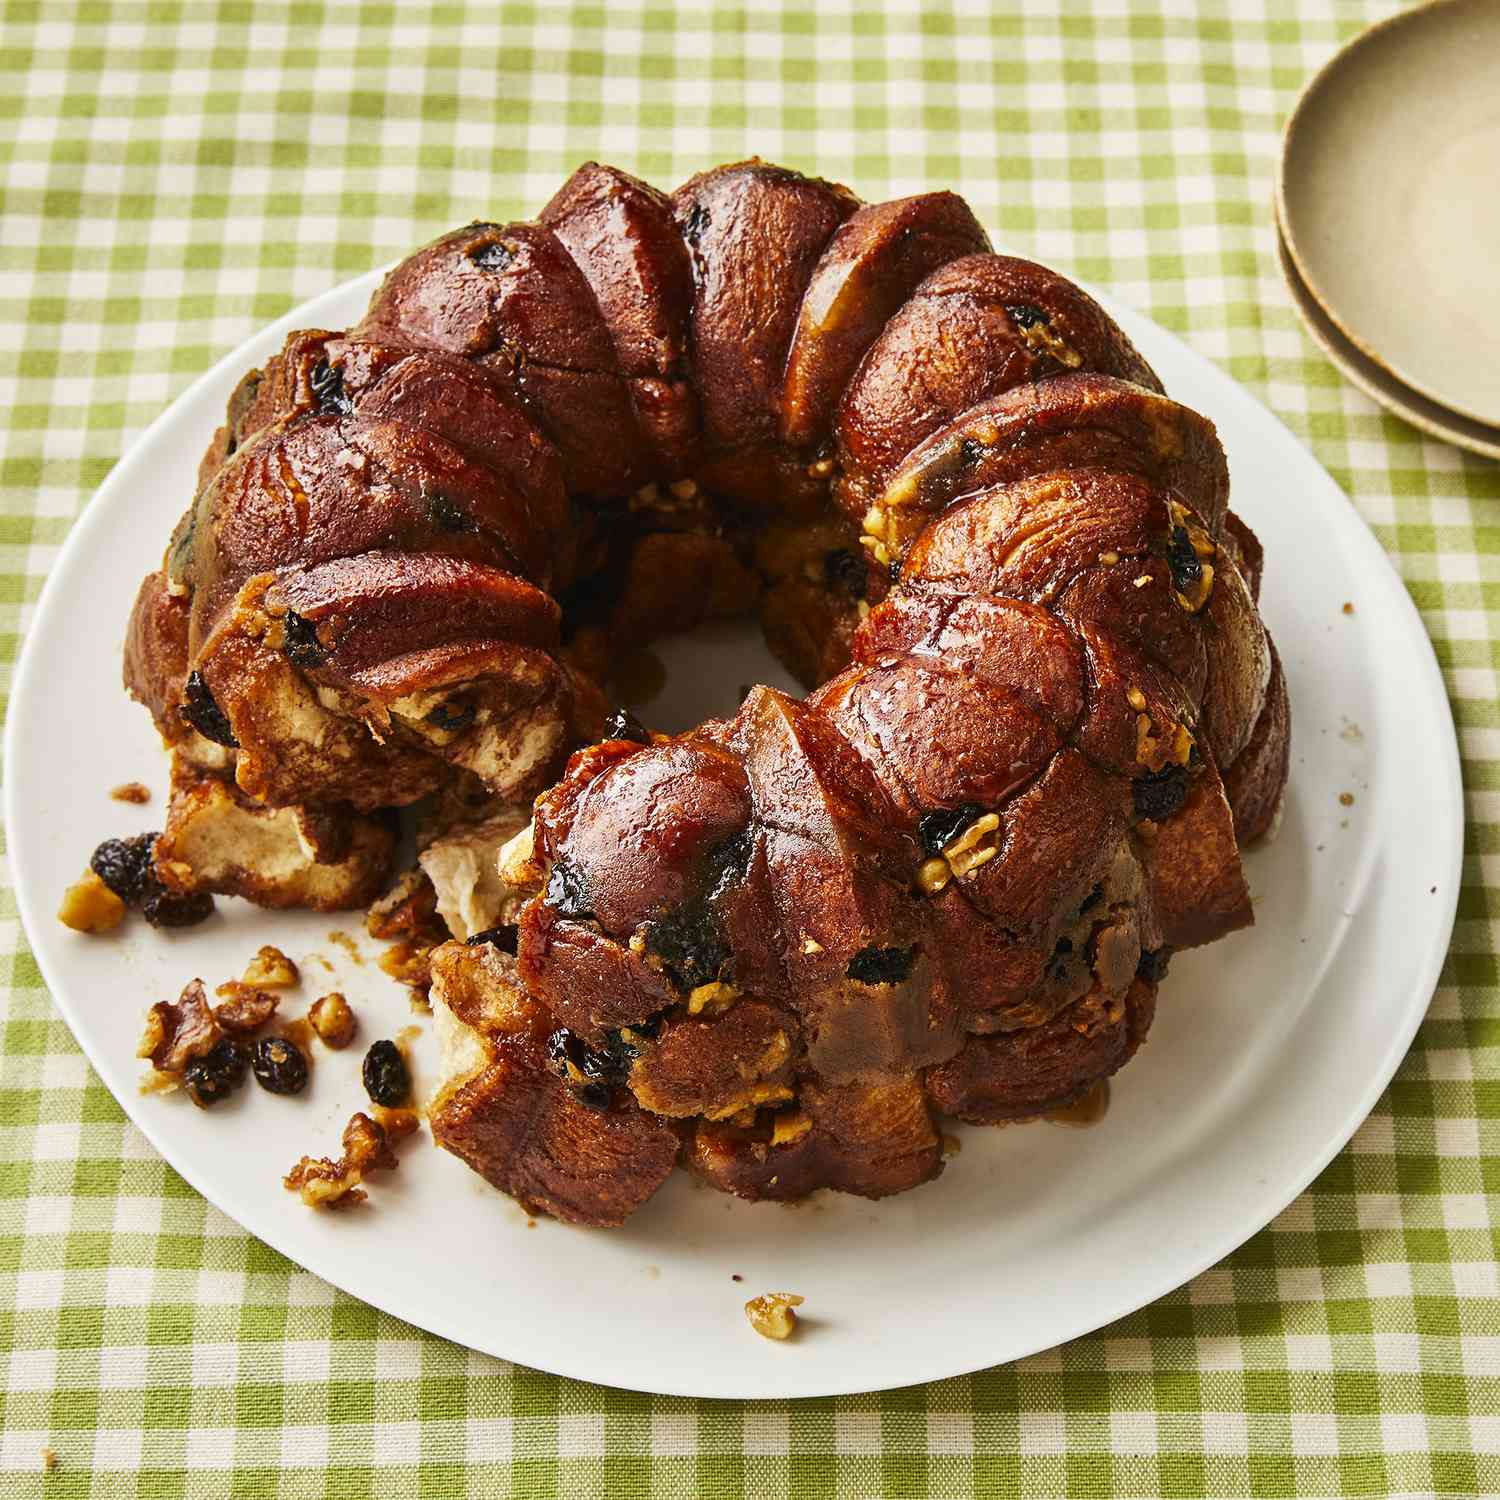 a high angle view of fresh monkey bread with a portion torn into